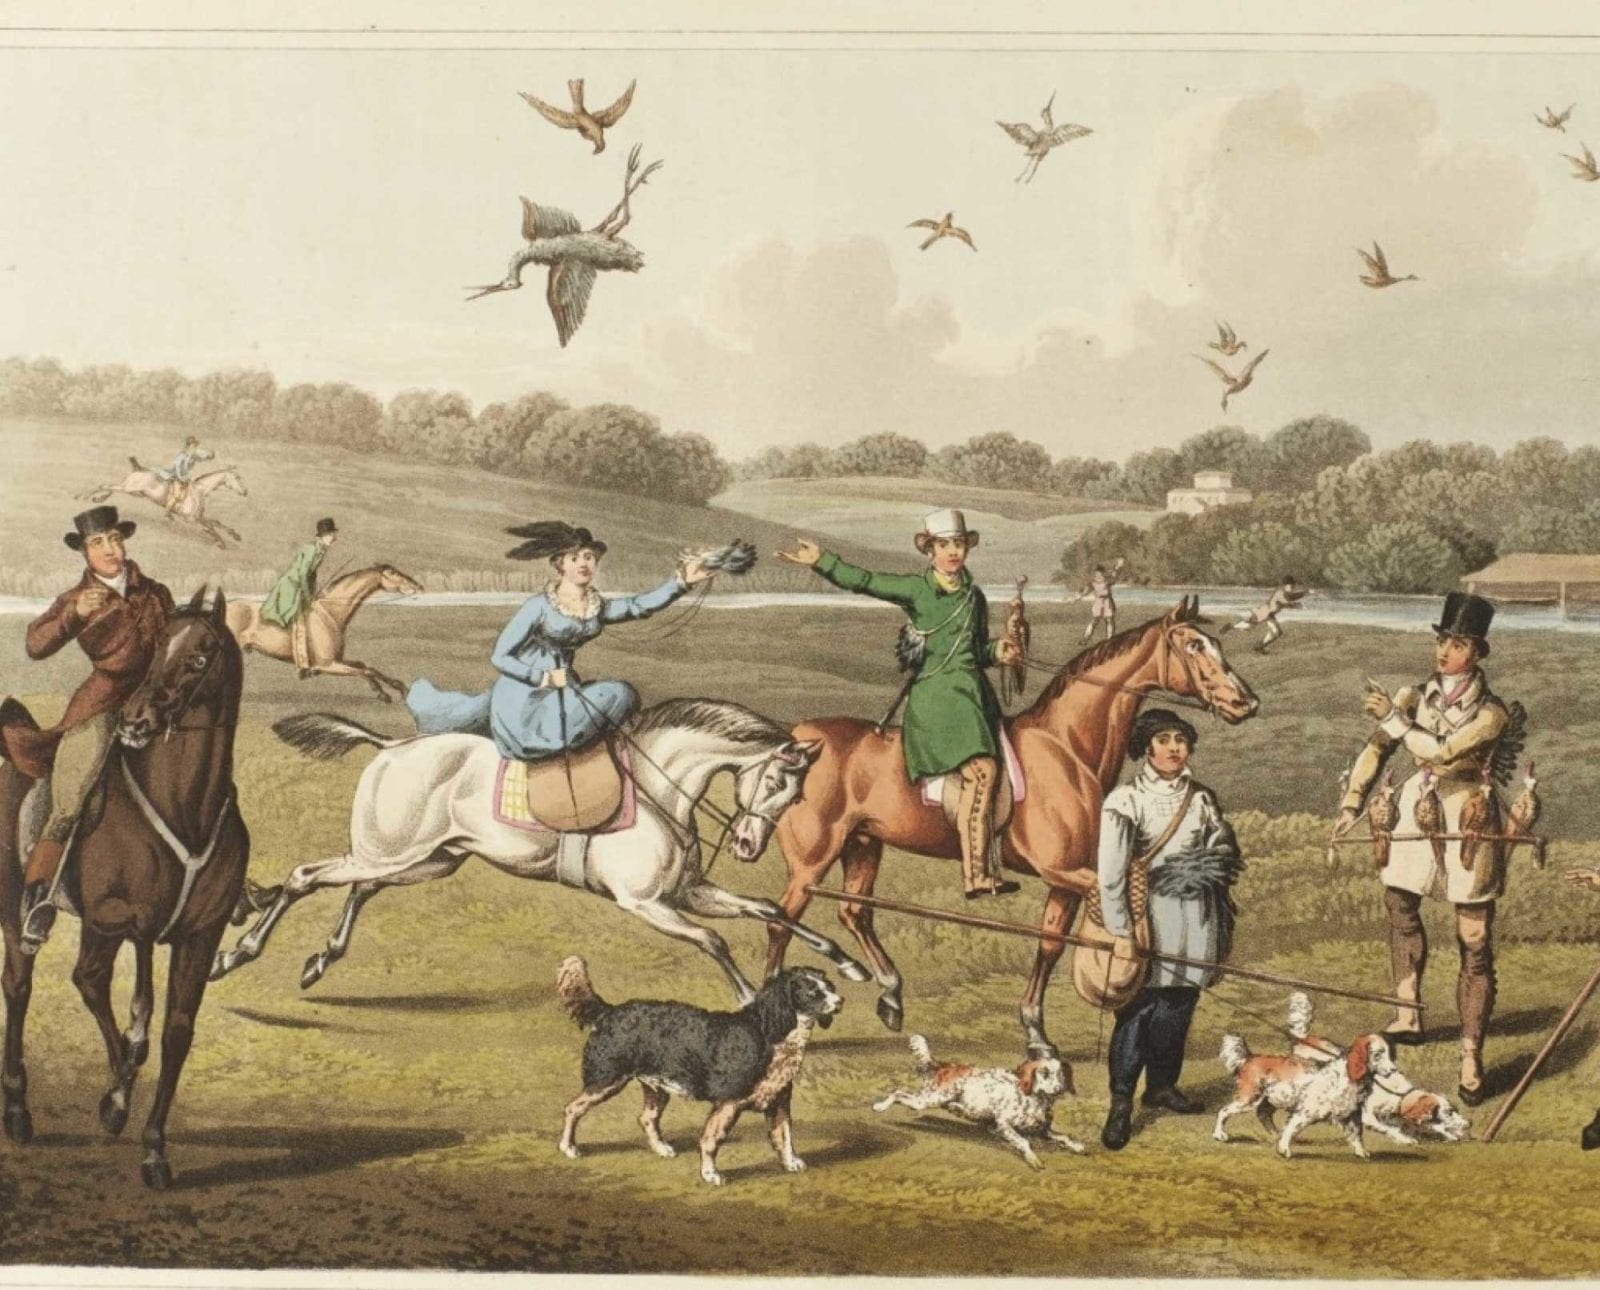 "Hawking" by H. Alkin depicting a falconry hunt on horseback with spaniels